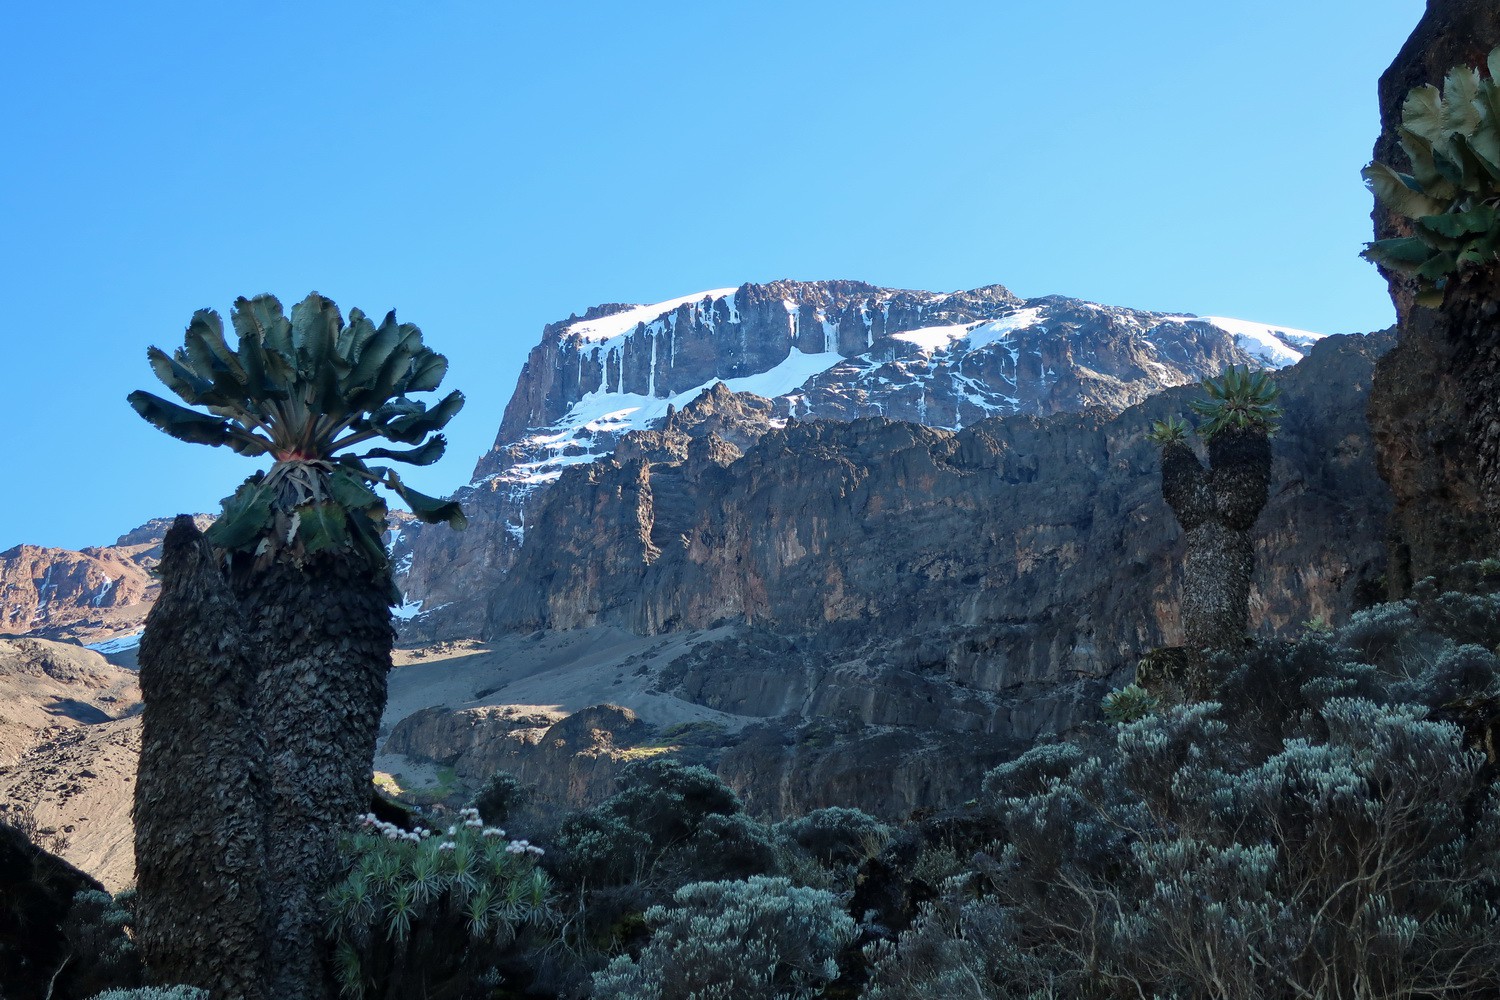 Kilimanjaro in the morning - picture close to Baranco Camp